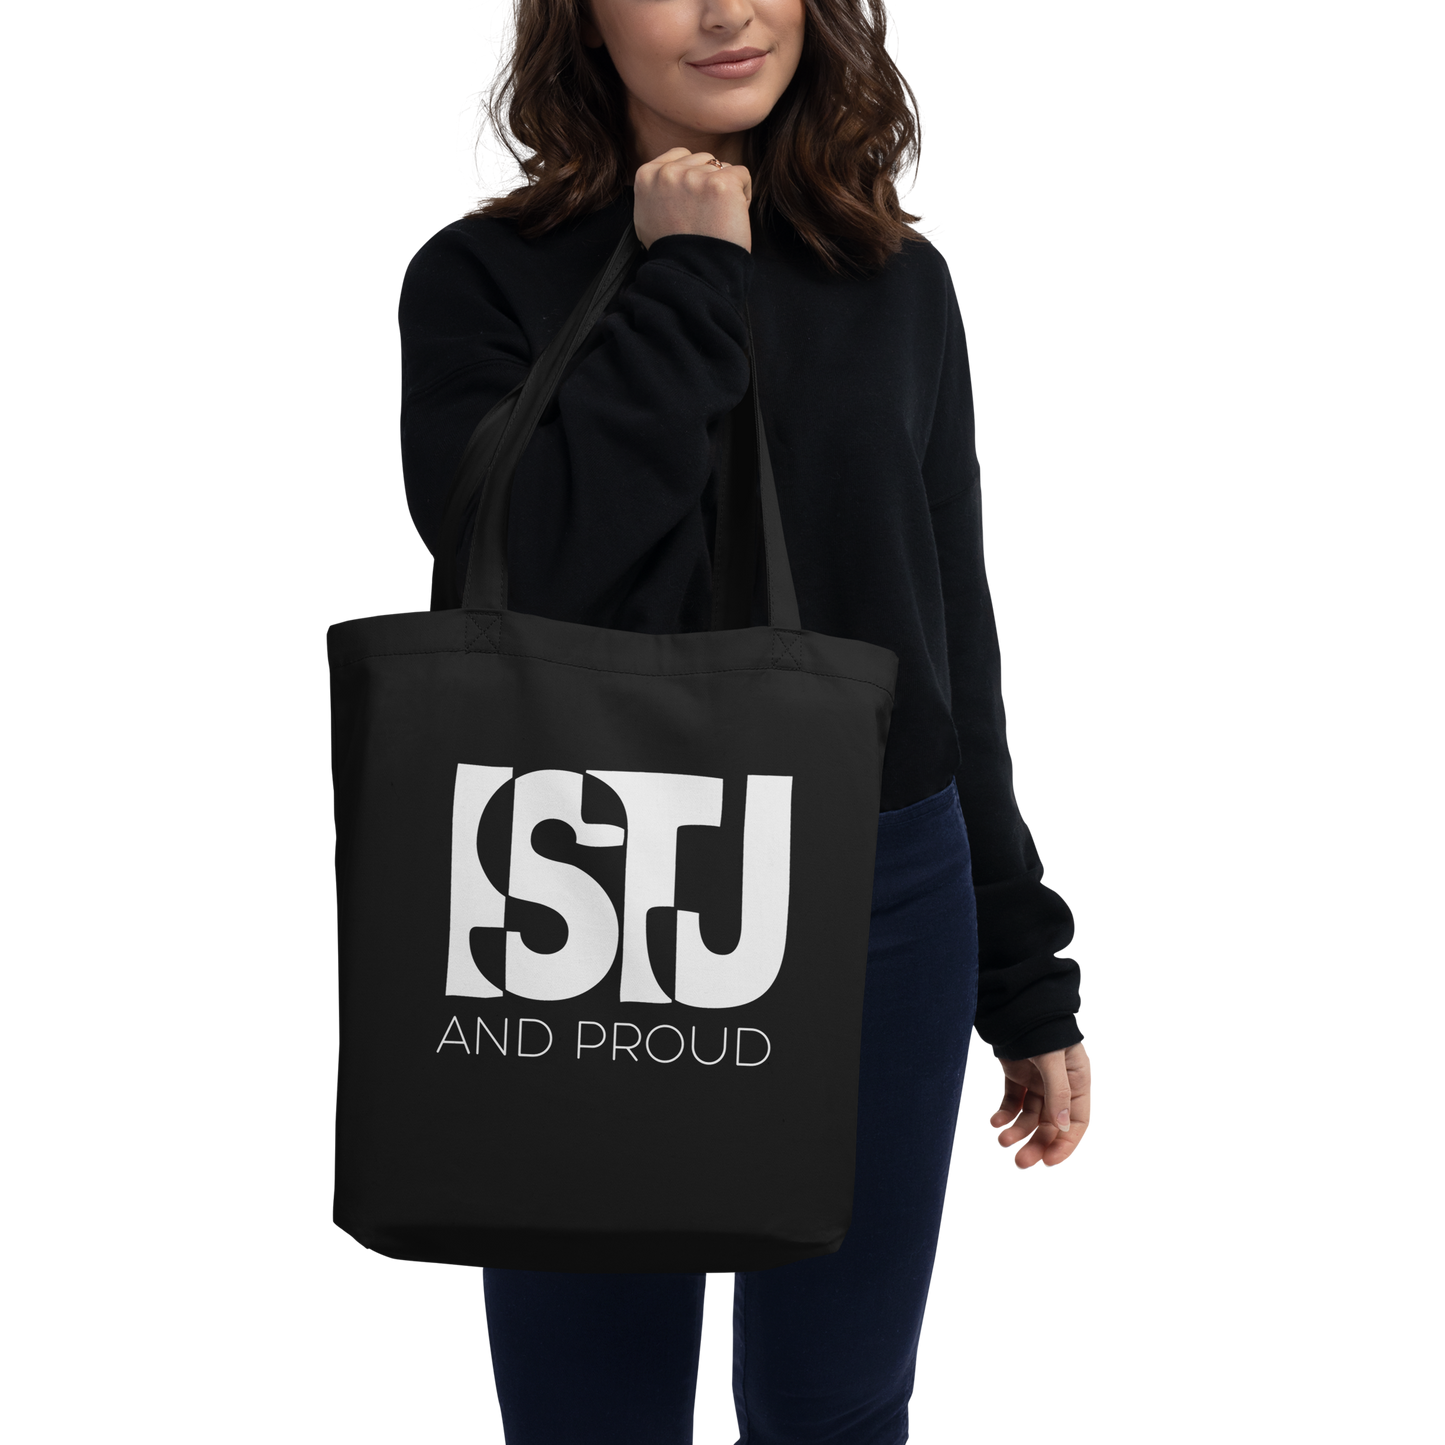 ISTJ and Proud Tote